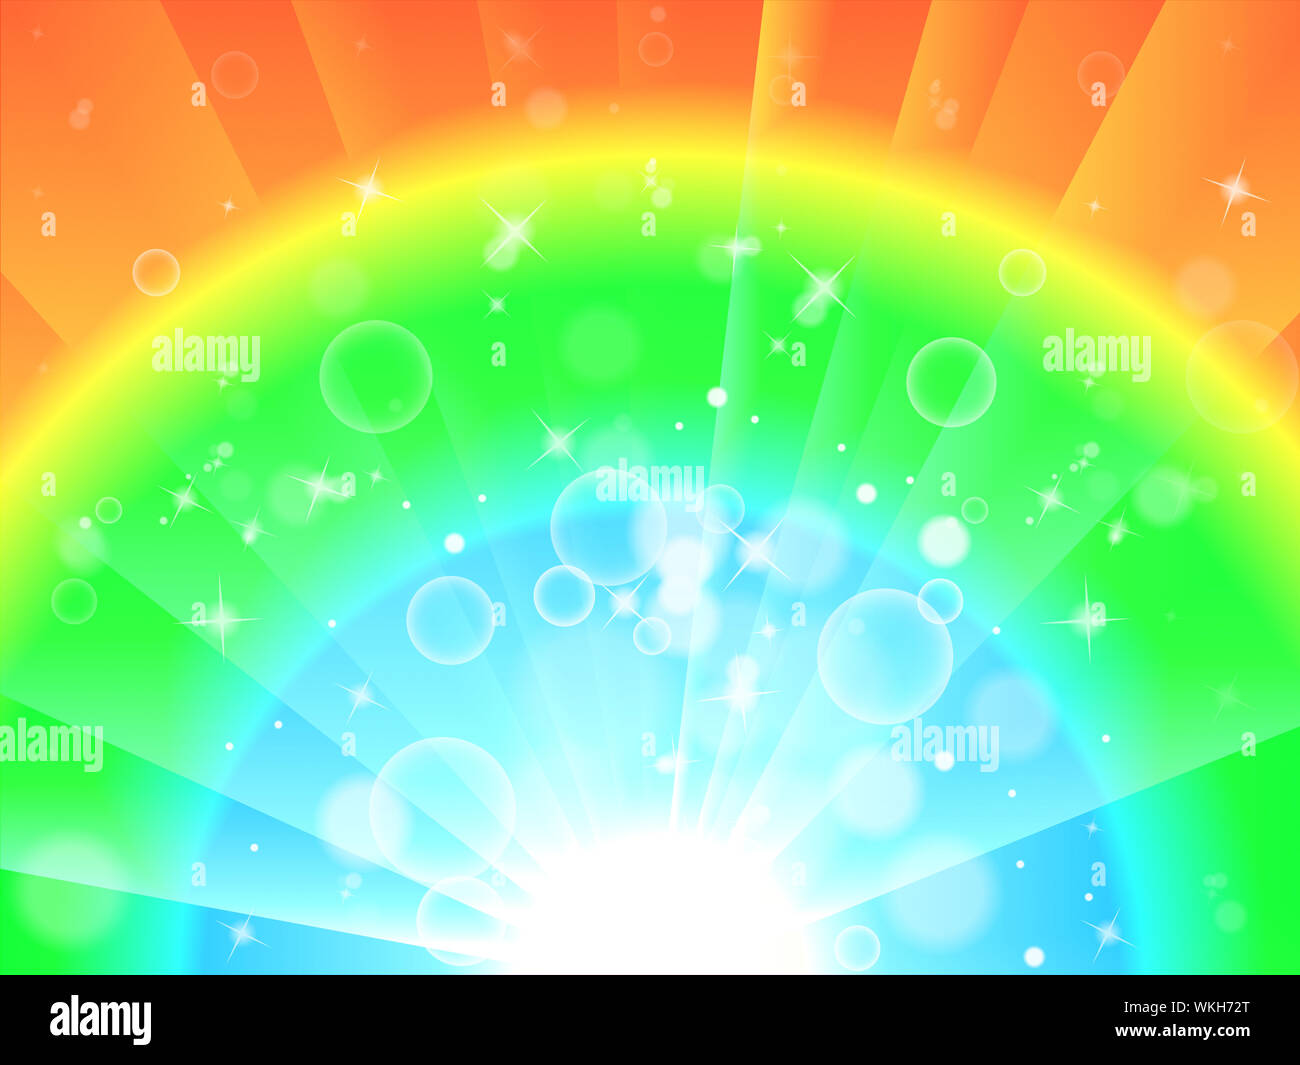 Bright Colourful Background Meaning Glowing Rainbow Or Twinkling Wallpaper Stock Photo